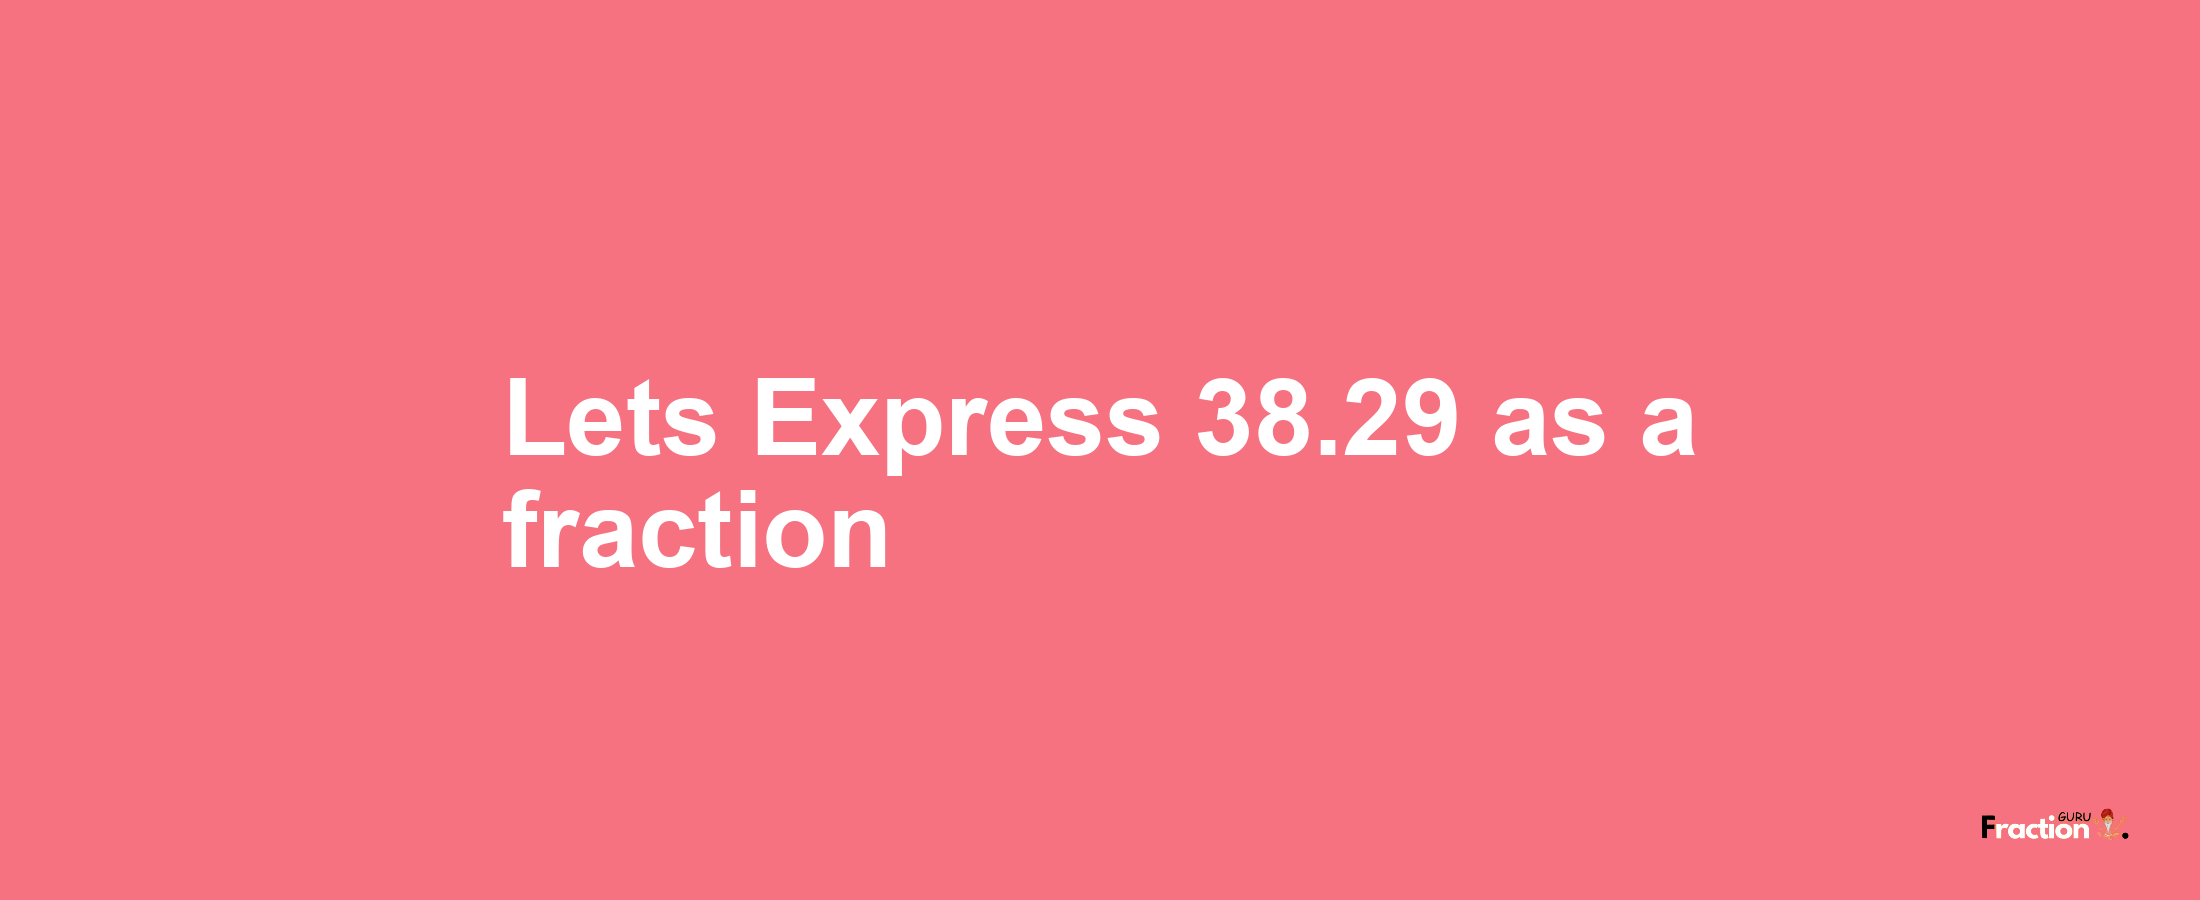 Lets Express 38.29 as afraction